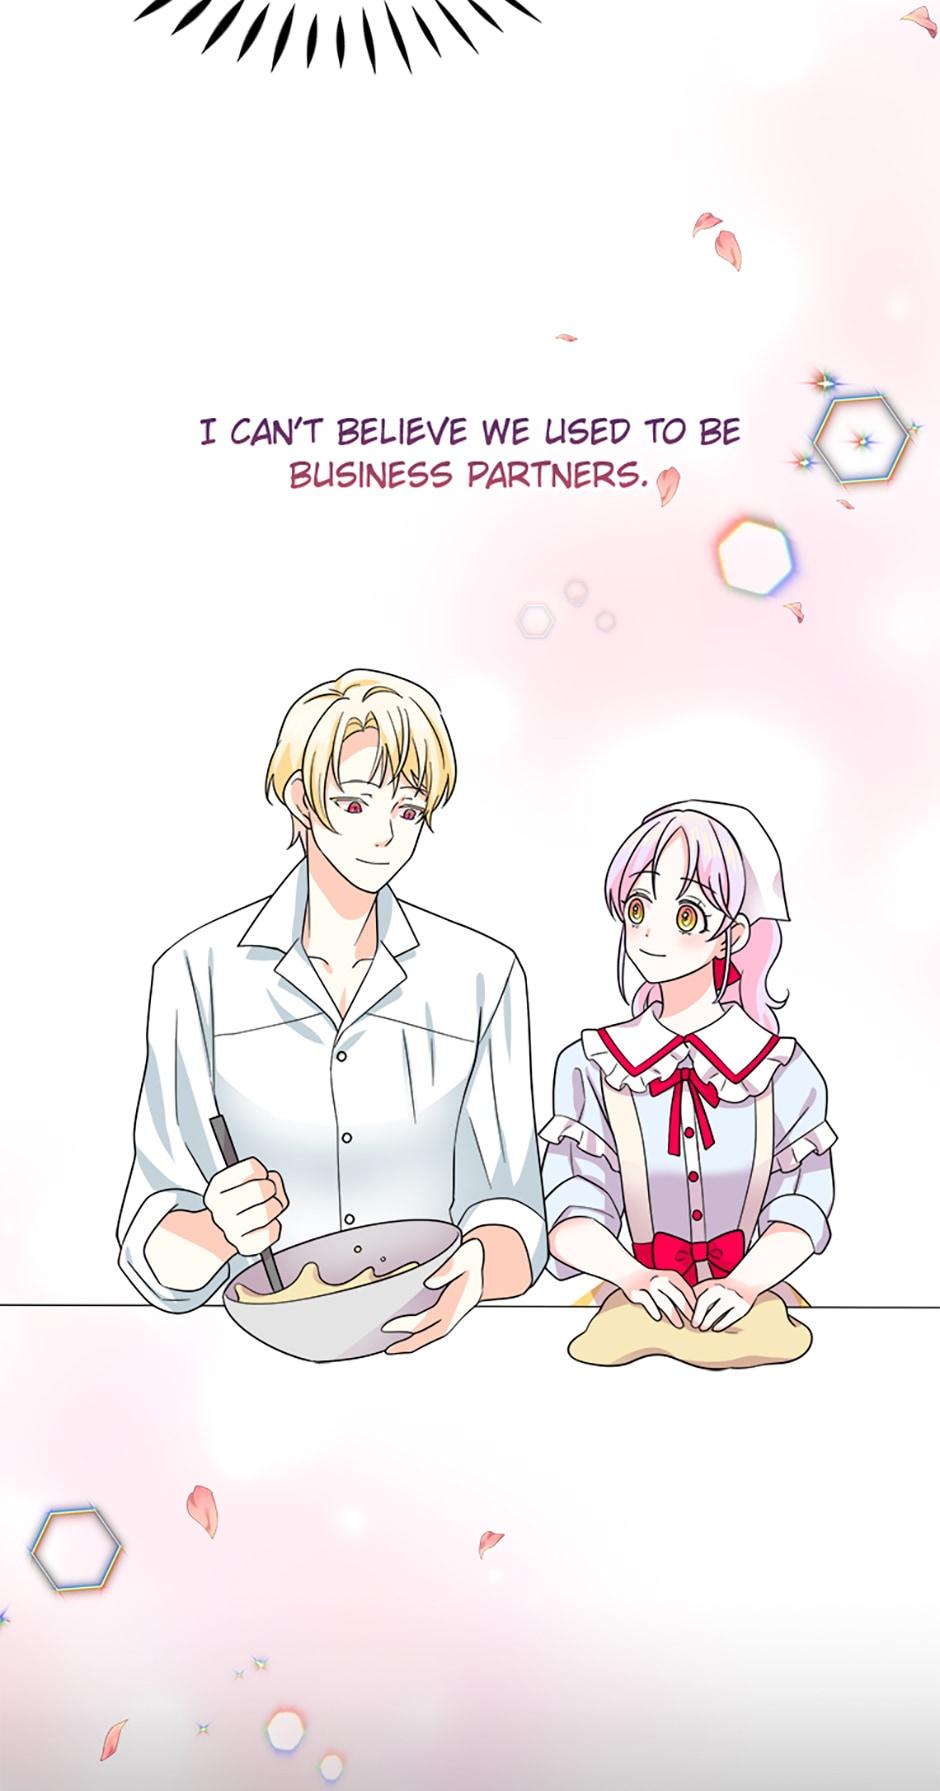 She came back and opened a dessert shop chapter 25